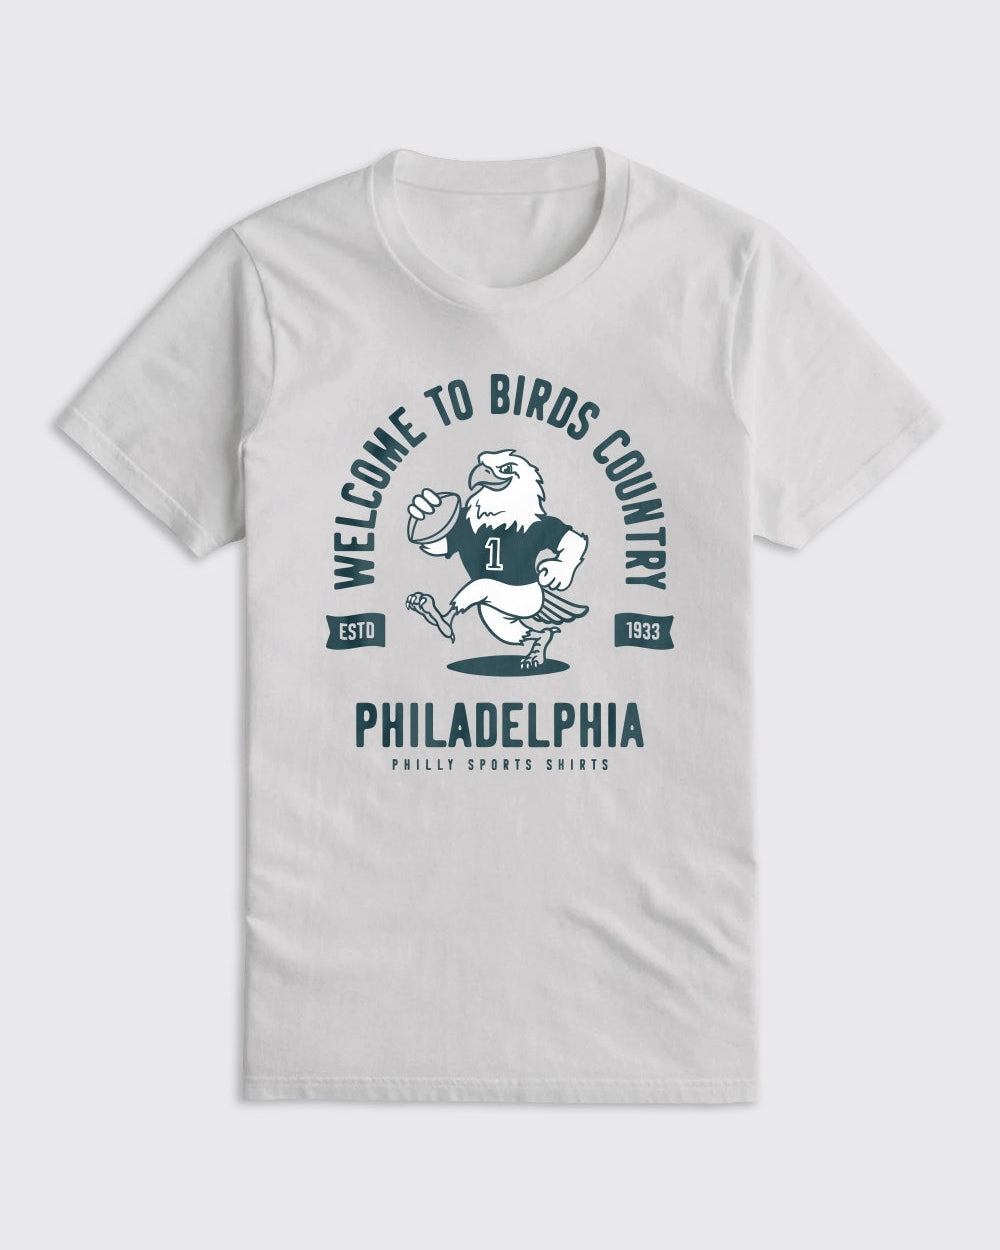 Welcome To Birds Country Shirt - Eagles, T-Shirts - Philly Sports Shirts